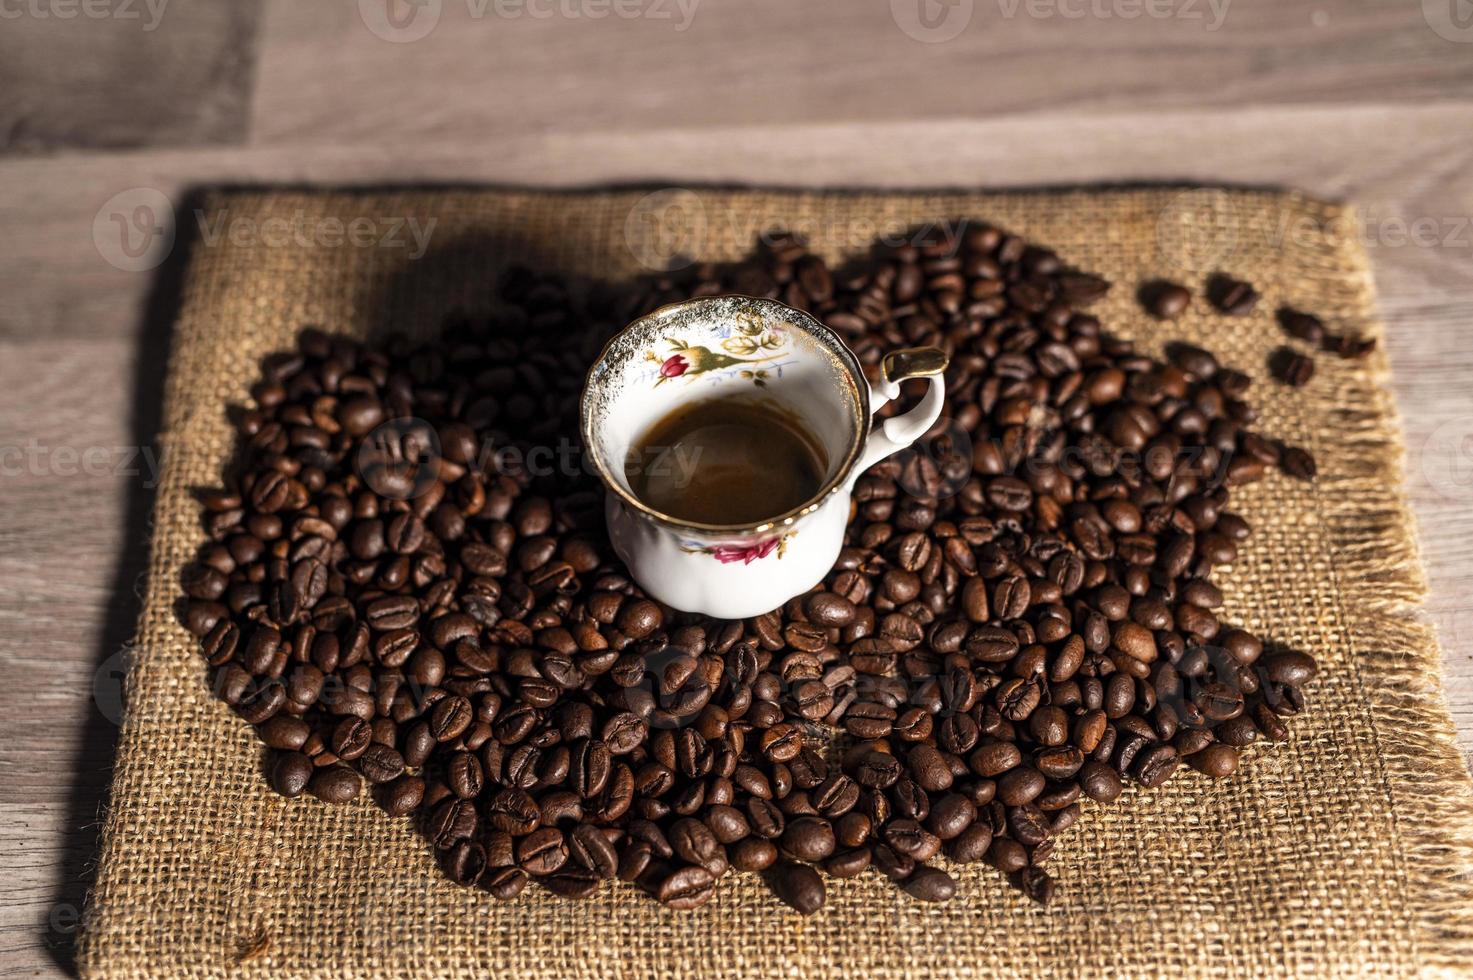 cup of coffee amidst coffee beans photo